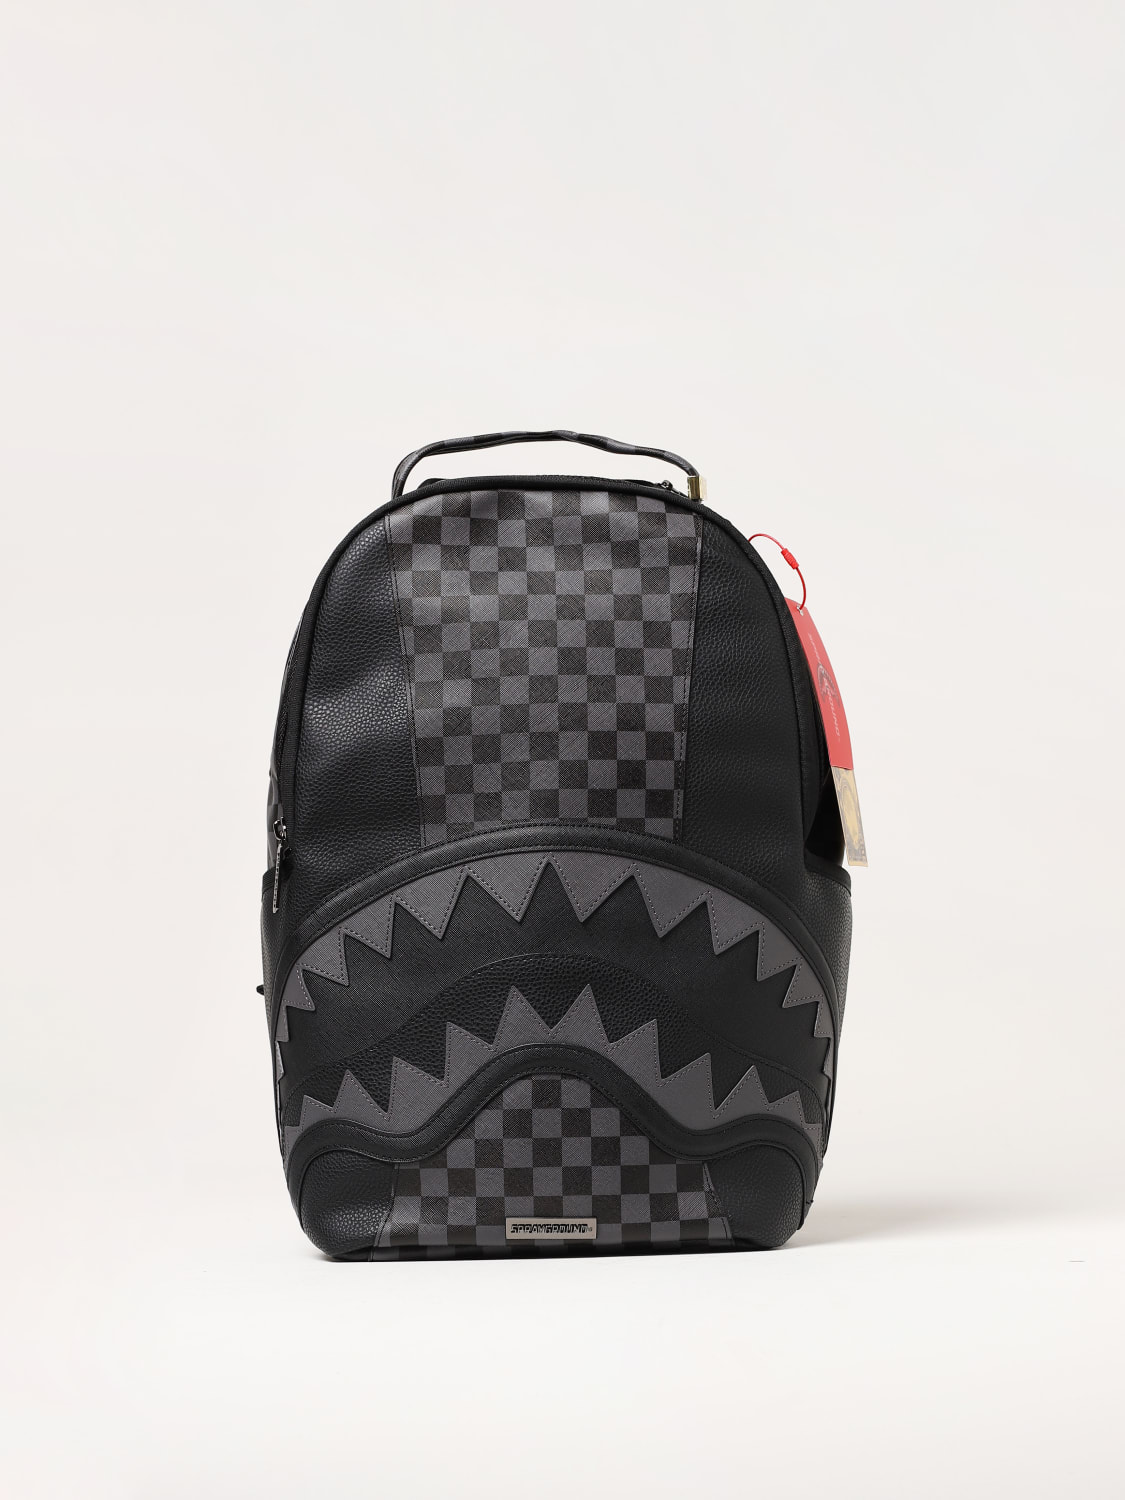 Backpacks Sprayground - Checked pattern backpack in black and grey